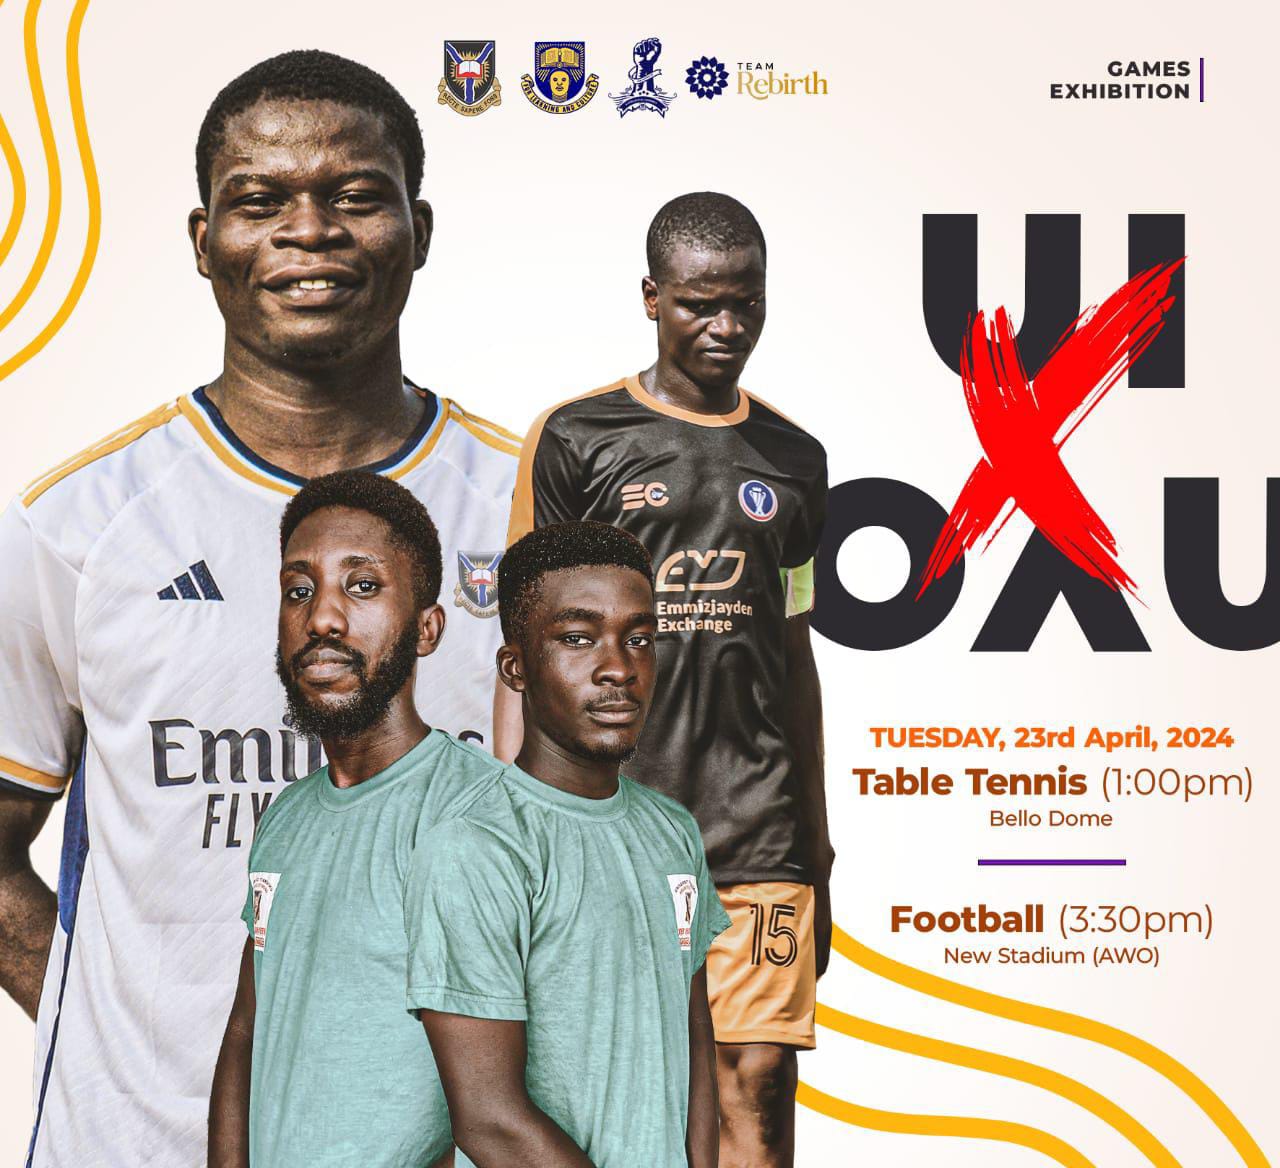 Game Exhibition: OAU Beats UI In Football Match